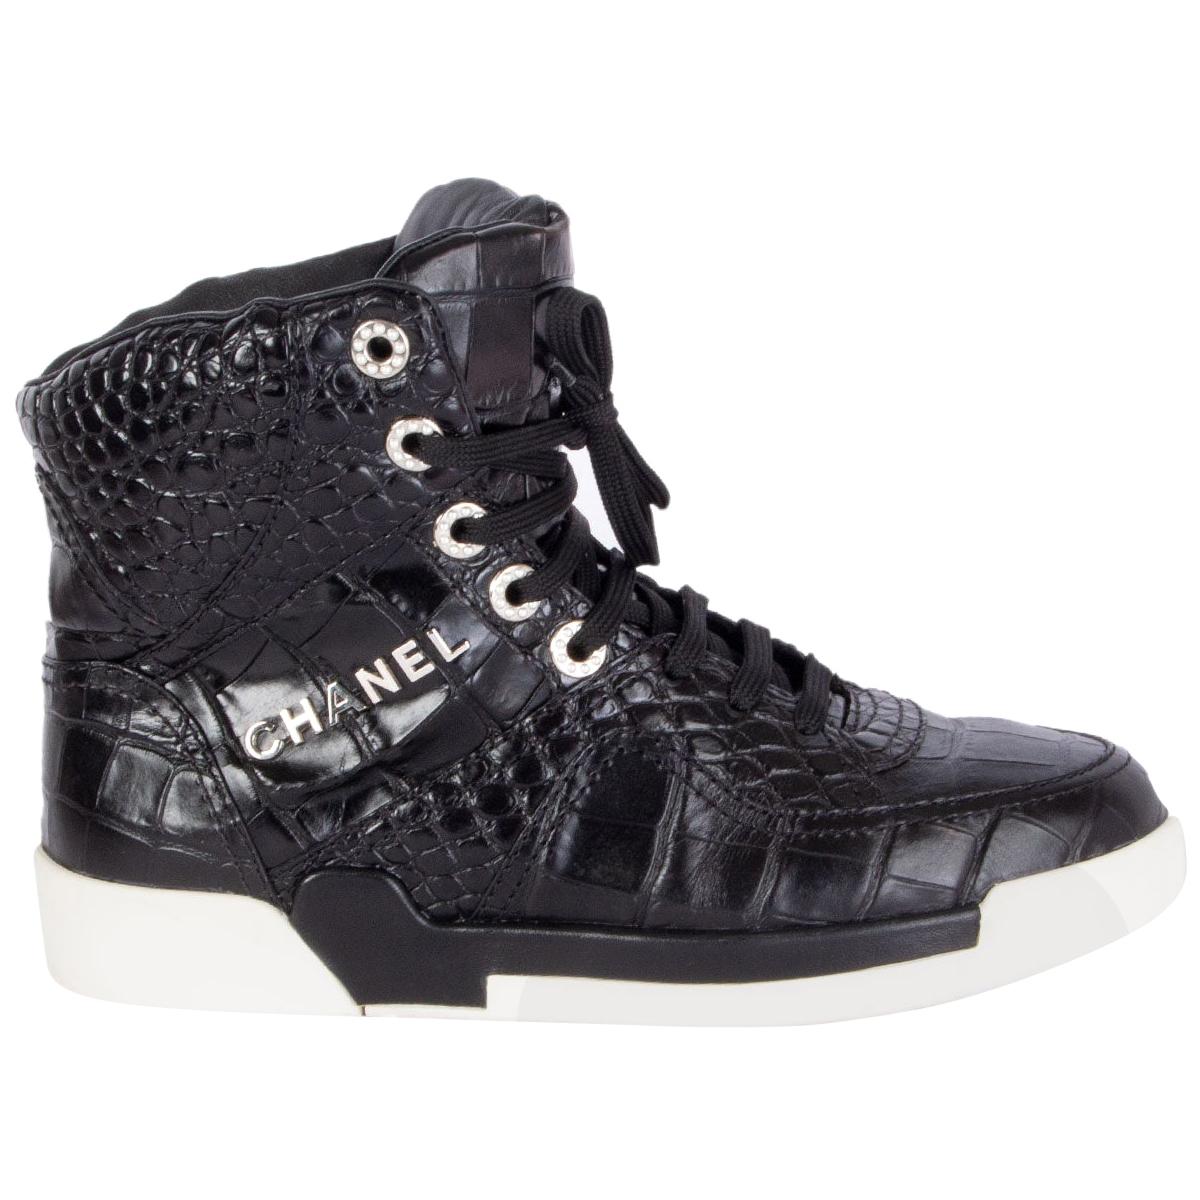 CHANEL black leather CROCODILE EMBOSSED Sneakers Shoes 38